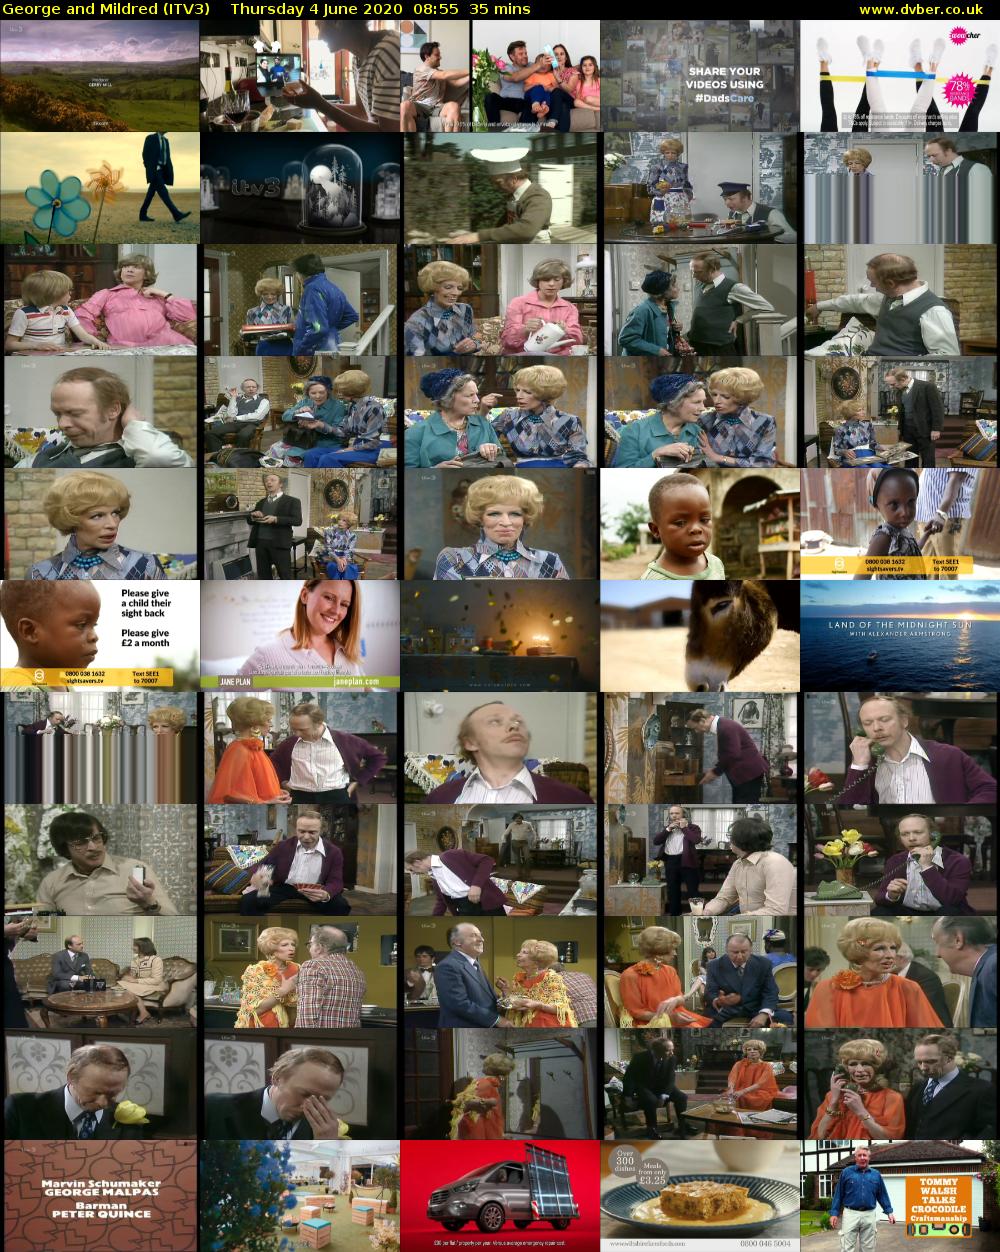 George and Mildred (ITV3) Thursday 4 June 2020 08:55 - 09:30